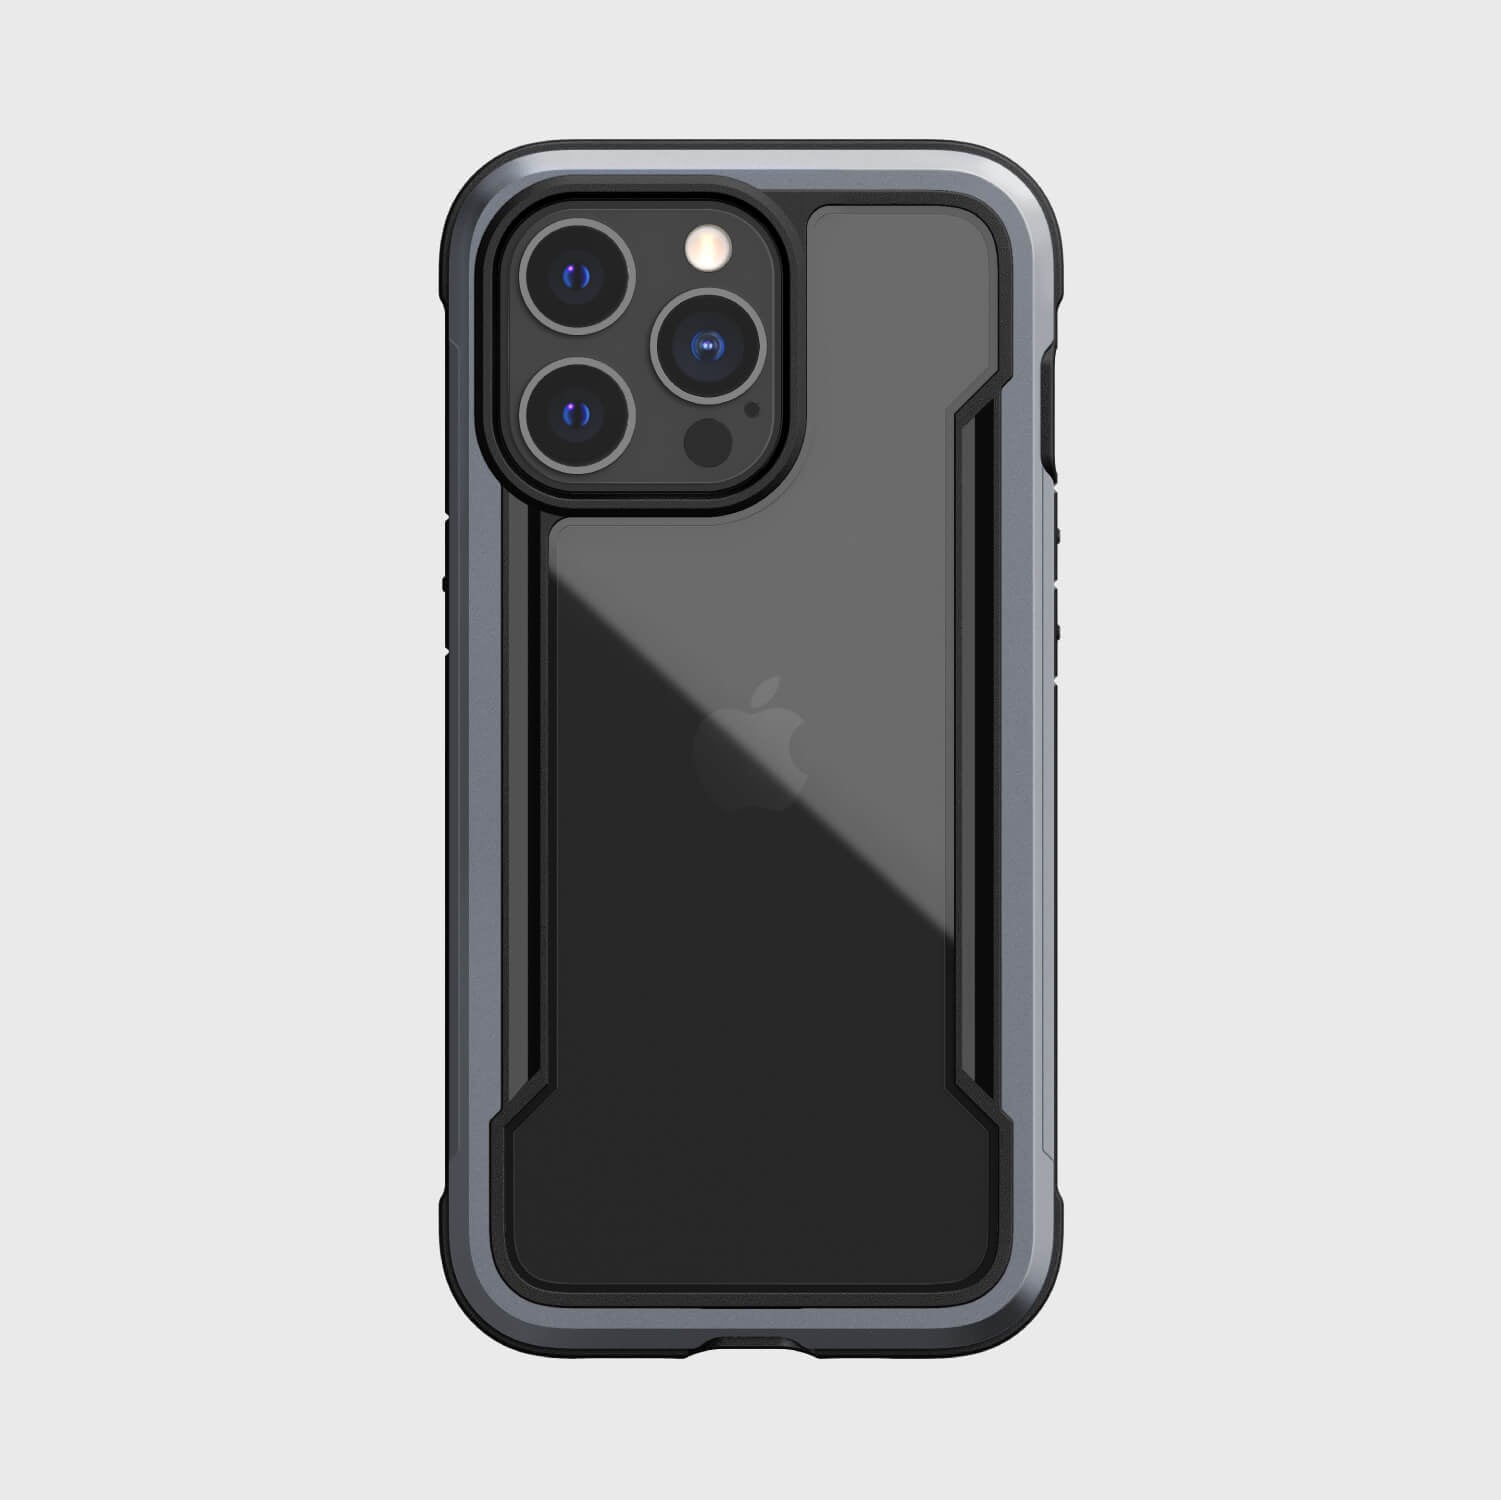 Introducing the Raptic Shield Pro, an iPhone 13 Pro case by Raptic that offers 13 foot drop protection. Safeguarding the back of your device, this case provides reliable defense against accidental drops.